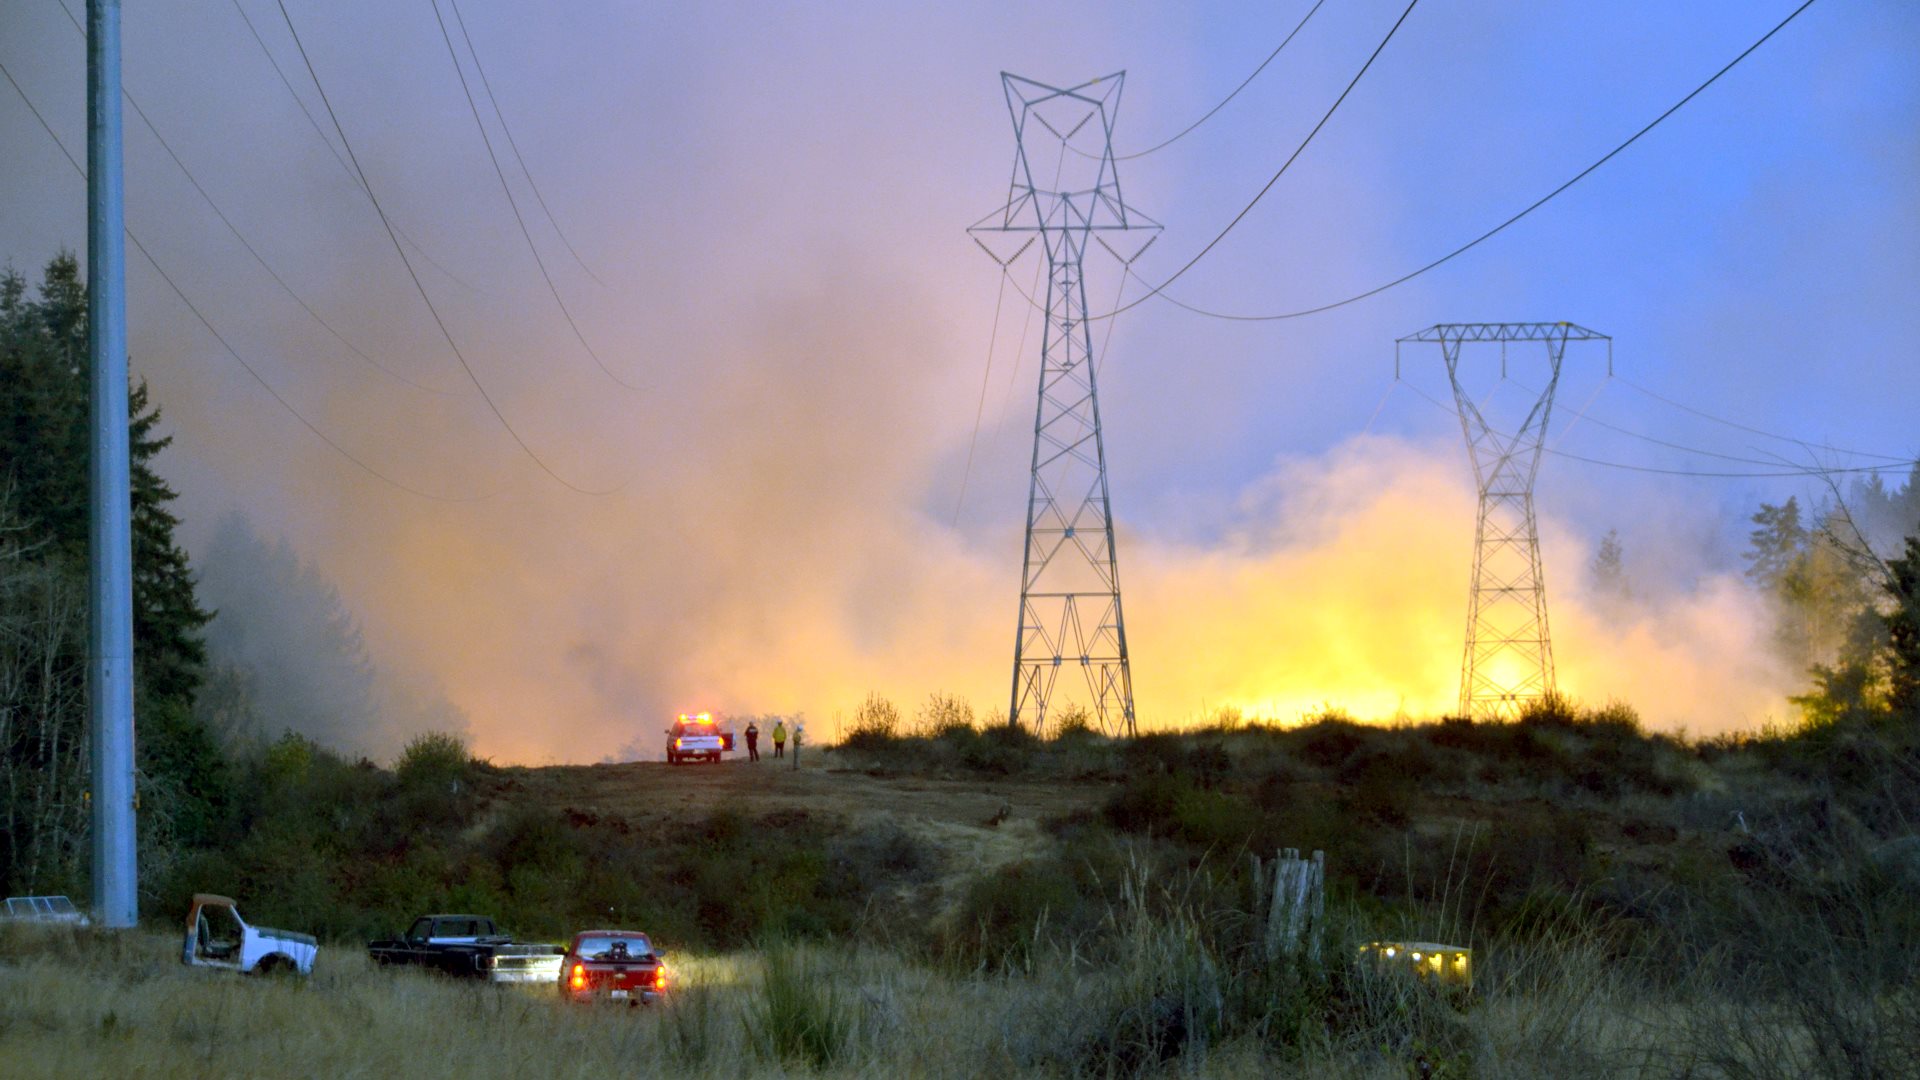 Wildfire approaching utility lines